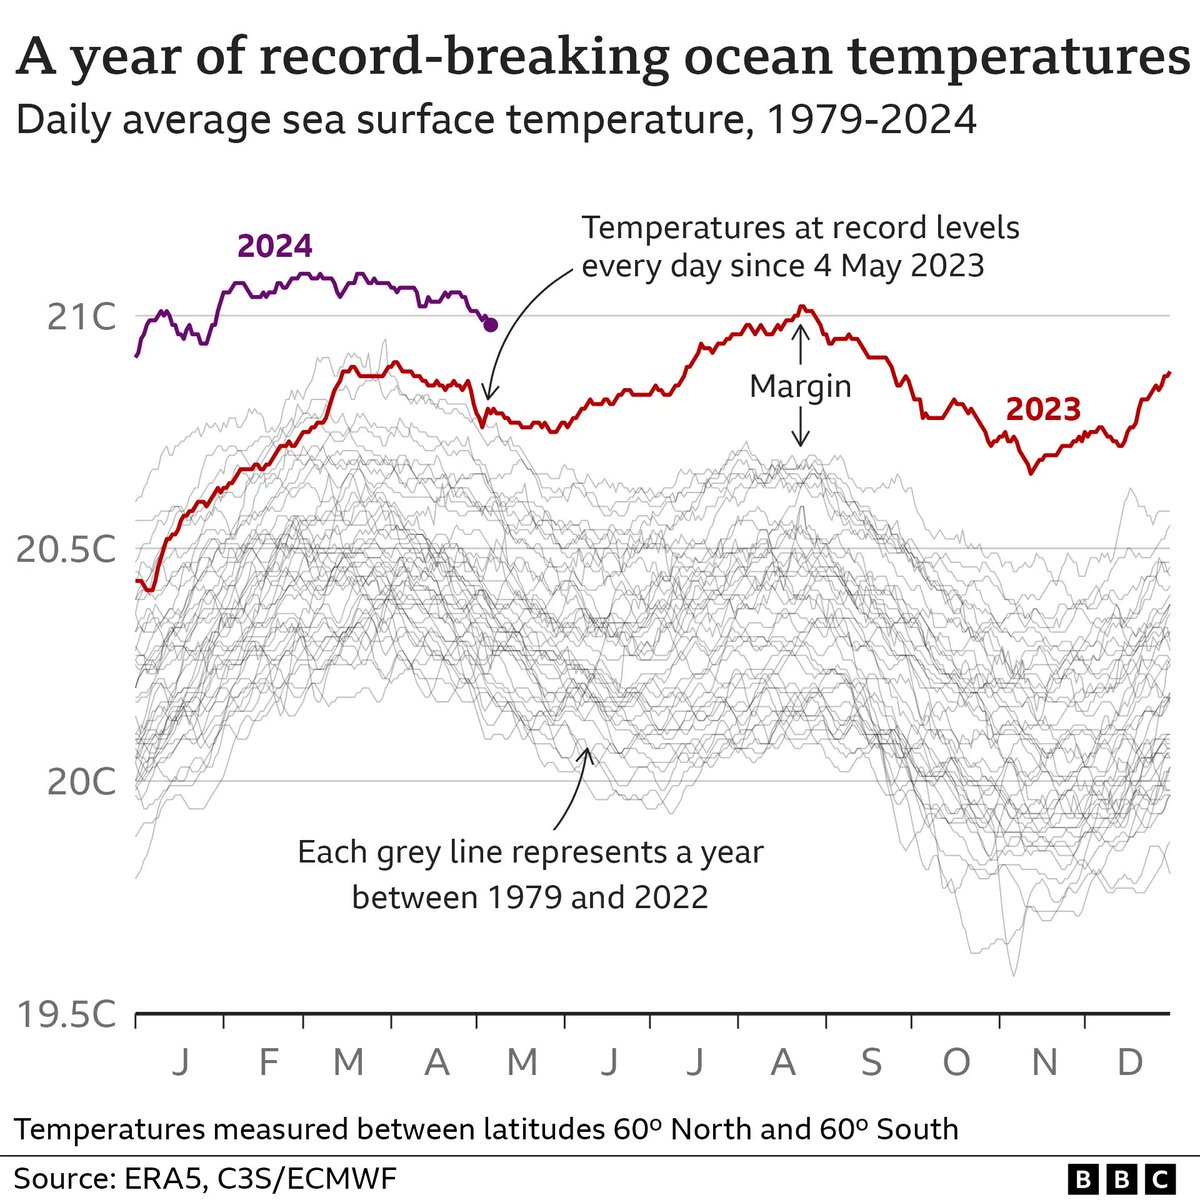 A whole year of record breaking ocean temperatures. This warmth has significant effects on ocean ecosystems. A large fraction of the world’s human population rely on protein from the ocean to live. Disruption to life in the ocean does affect us all. bbc.co.uk/news/science-e…